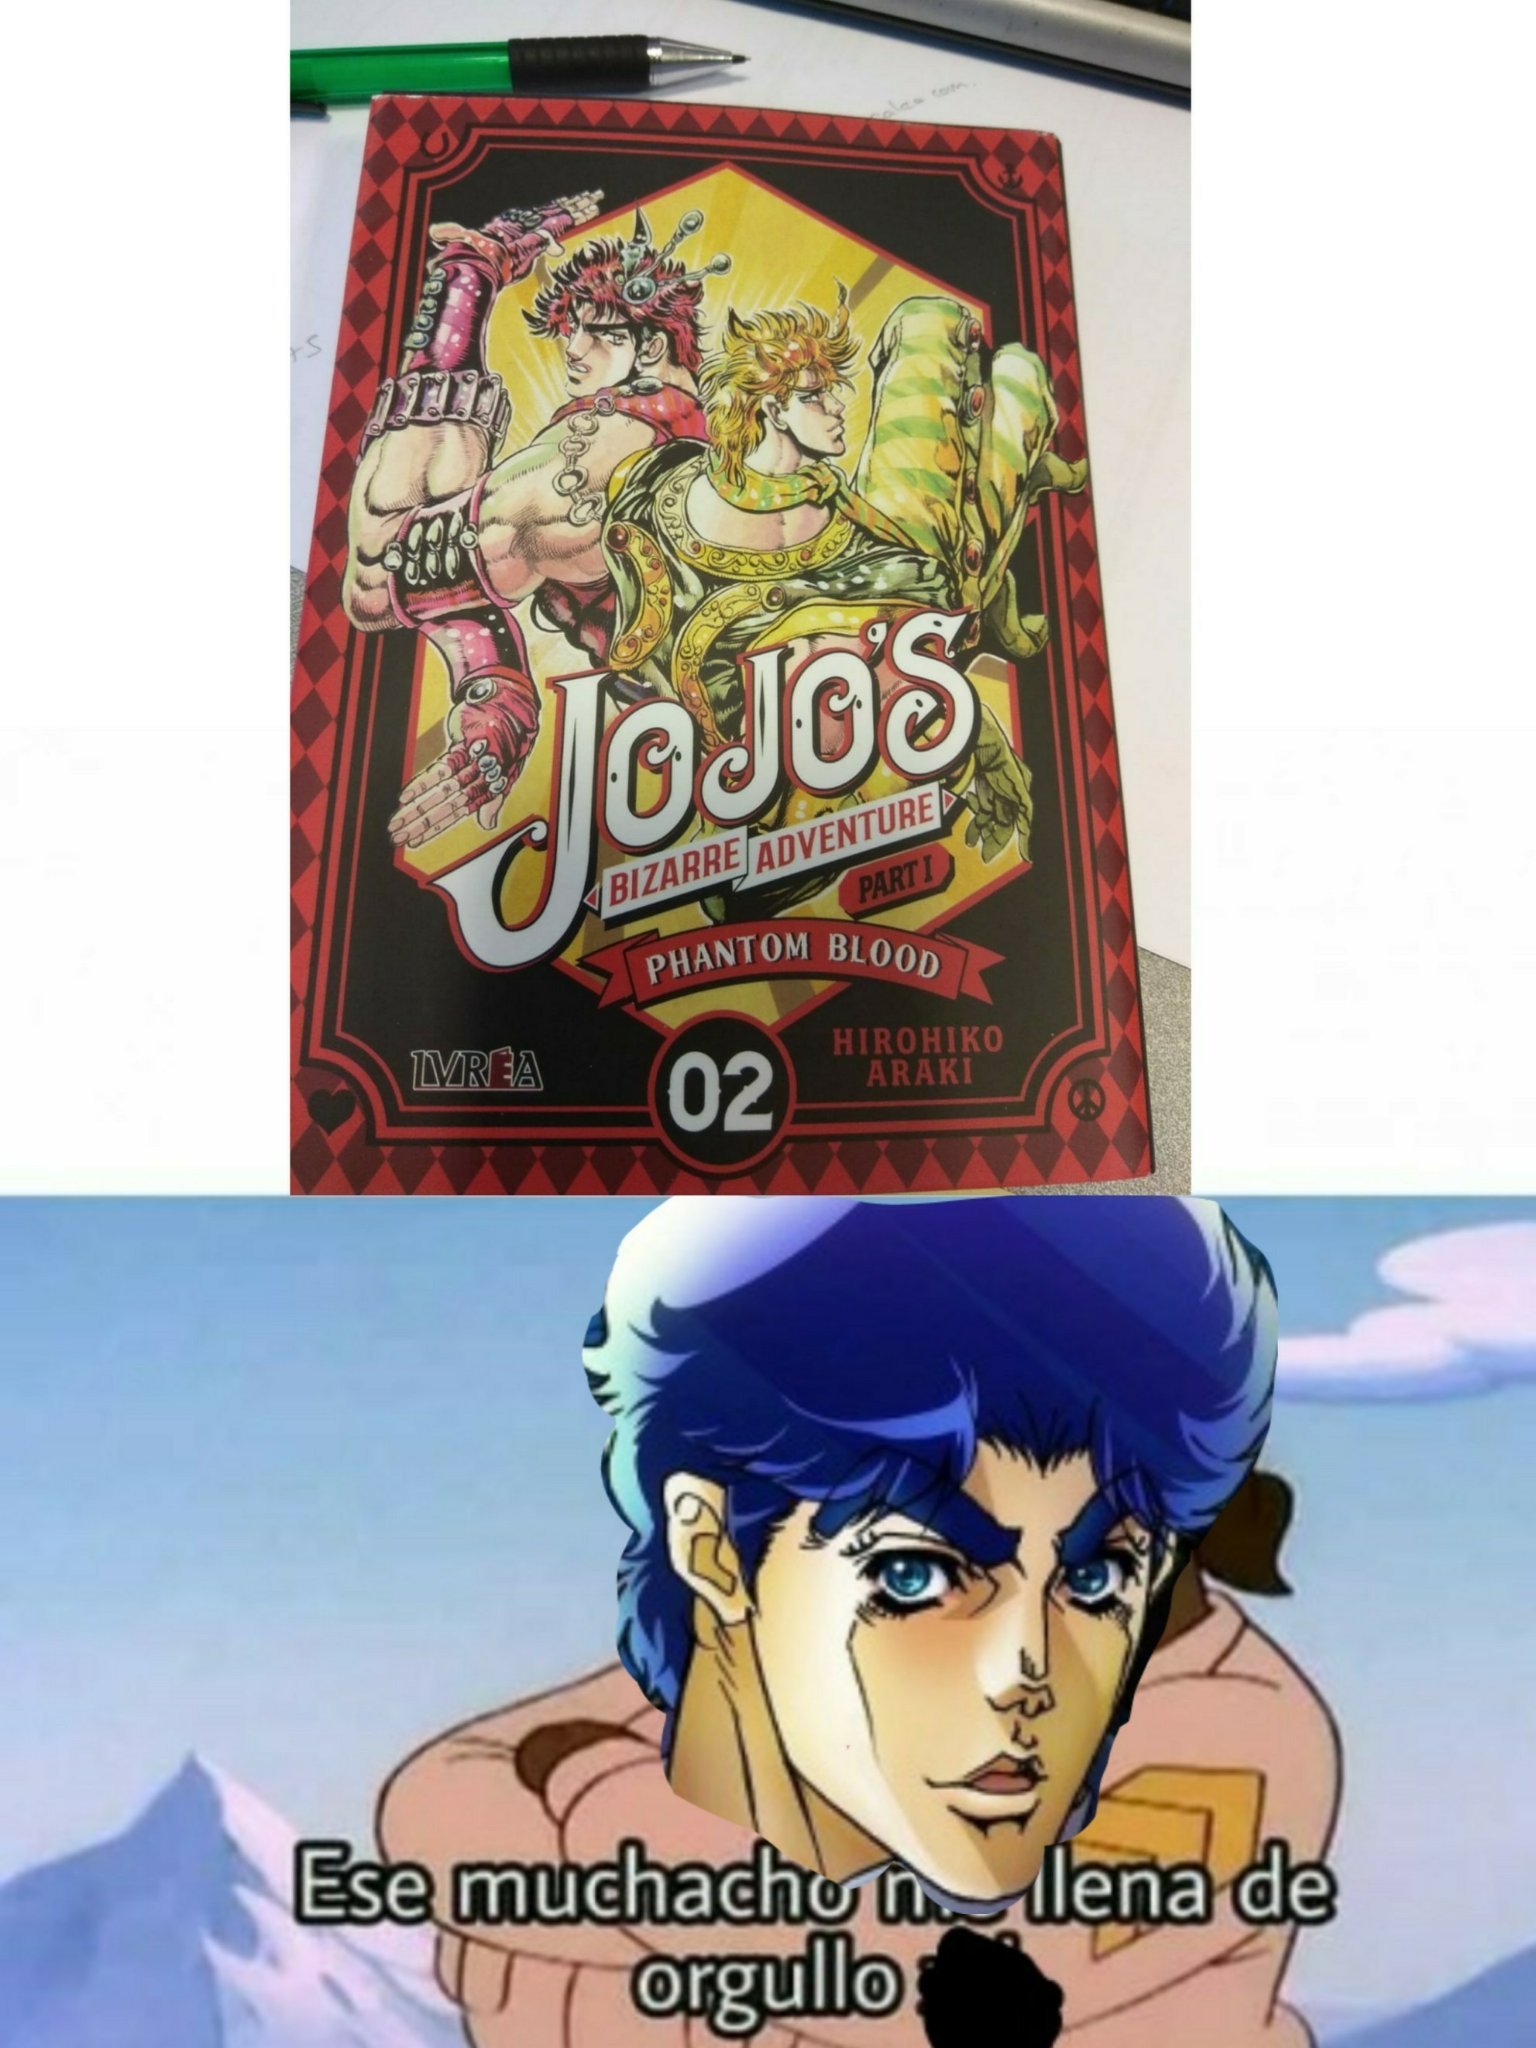 Is this a Jojo reference? - Meme by Josejaxard24 :) Memedroid